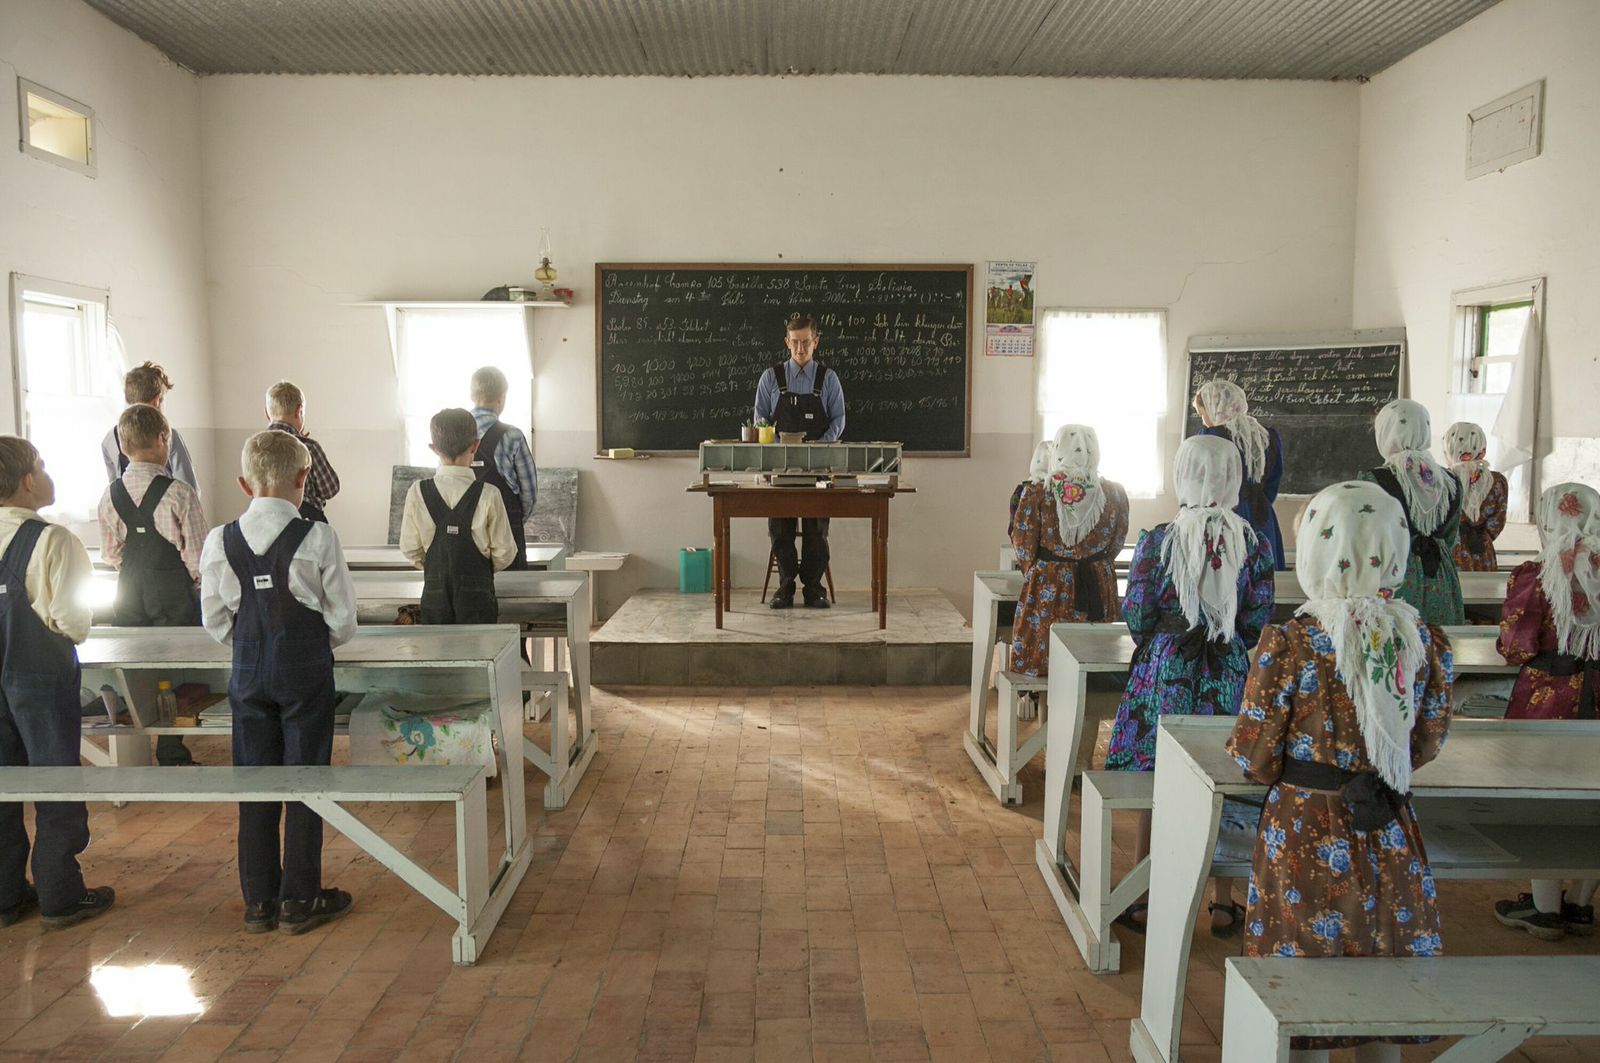 A prayer starts the classes in the professor Franz Petters's school. Girls and
                              boys seat at opposite sides of the classroom.